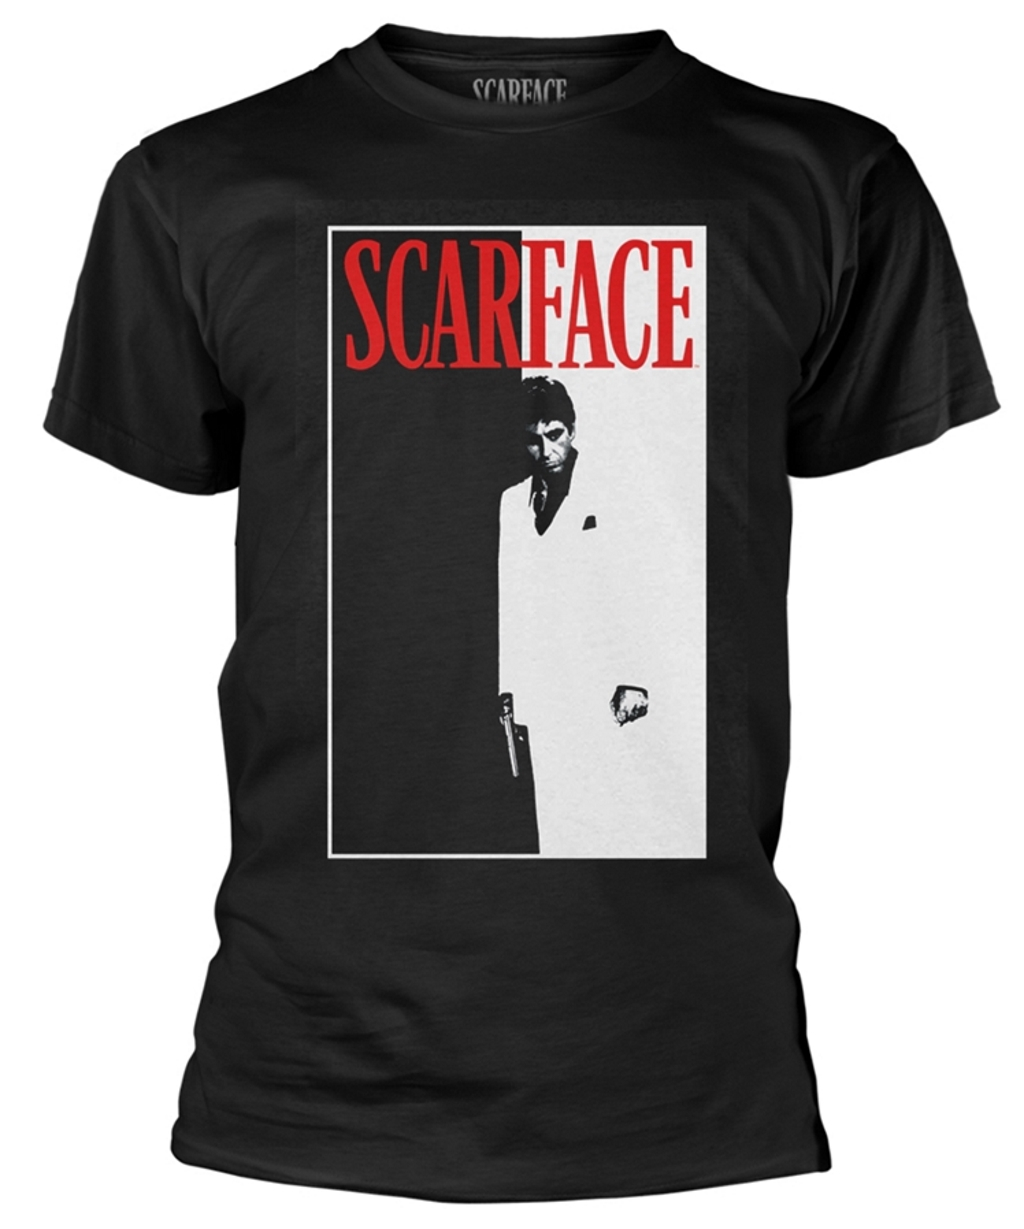 Scarface 'Movie Poster' T-Shirt - NEW & OFFICIAL! | eBay